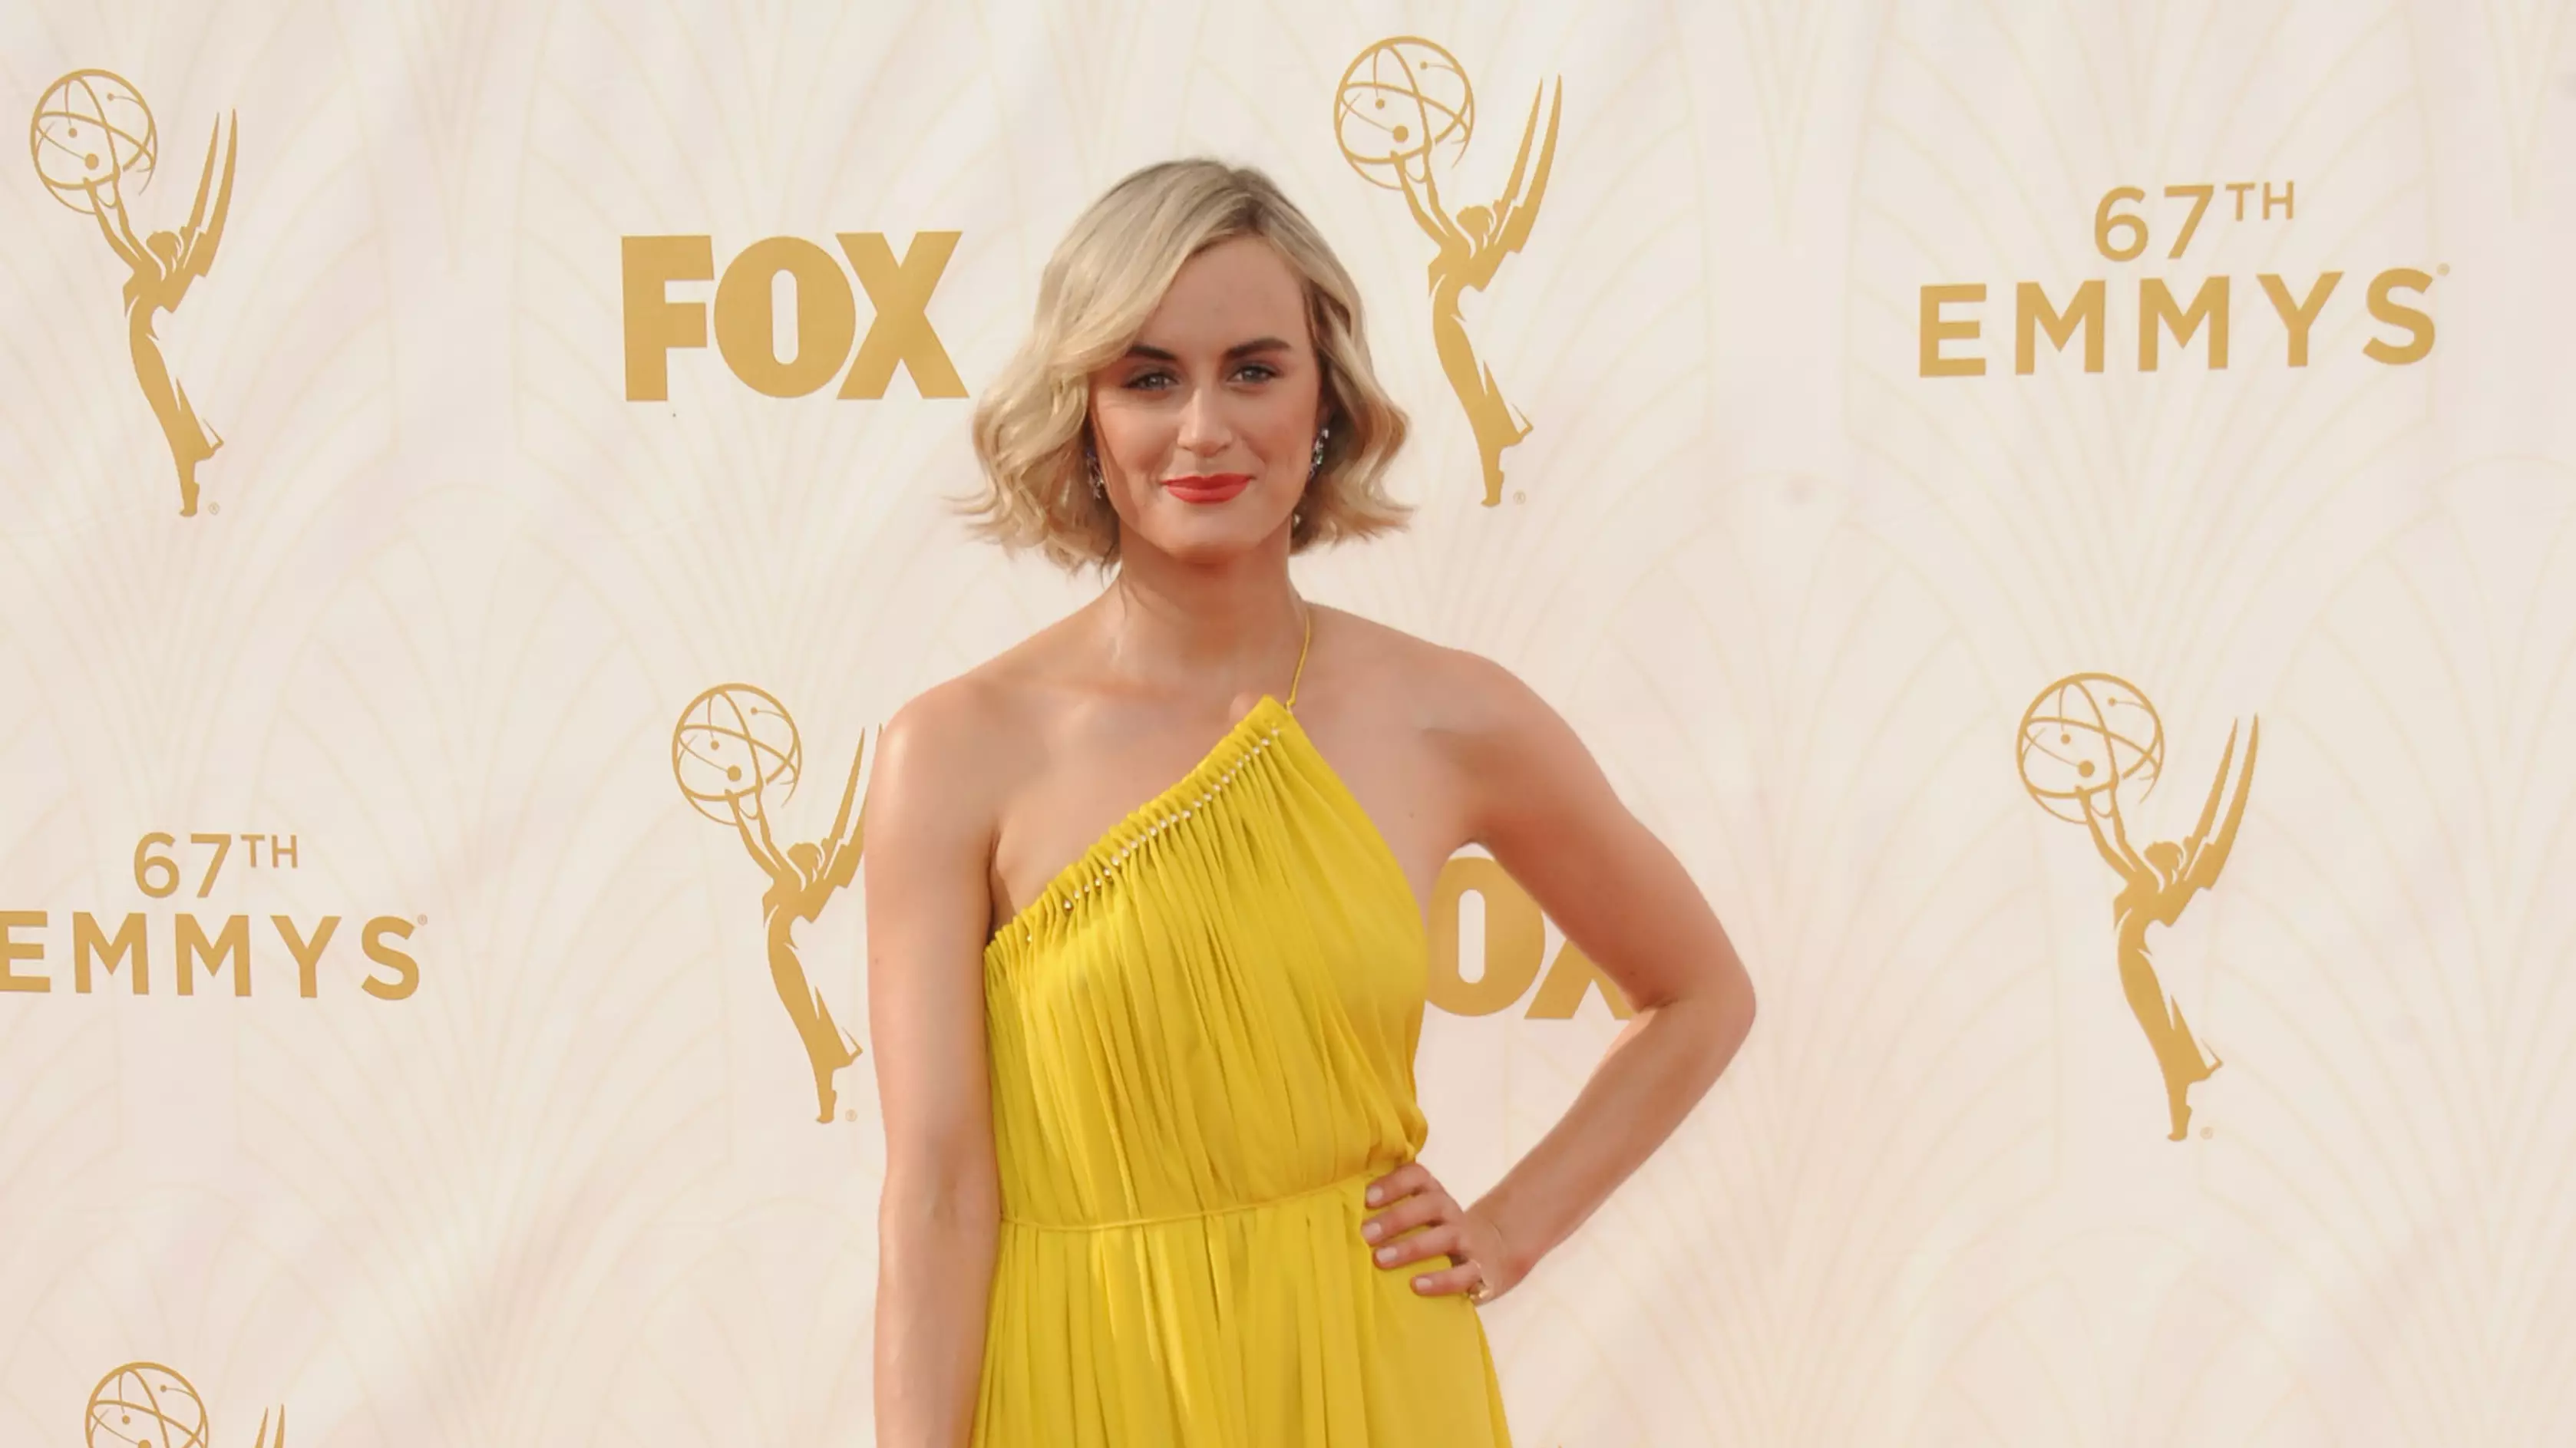 'Orange Is The New Black' Star Taylor Schilling Confirms New Relationship With Sweet Instagram Post